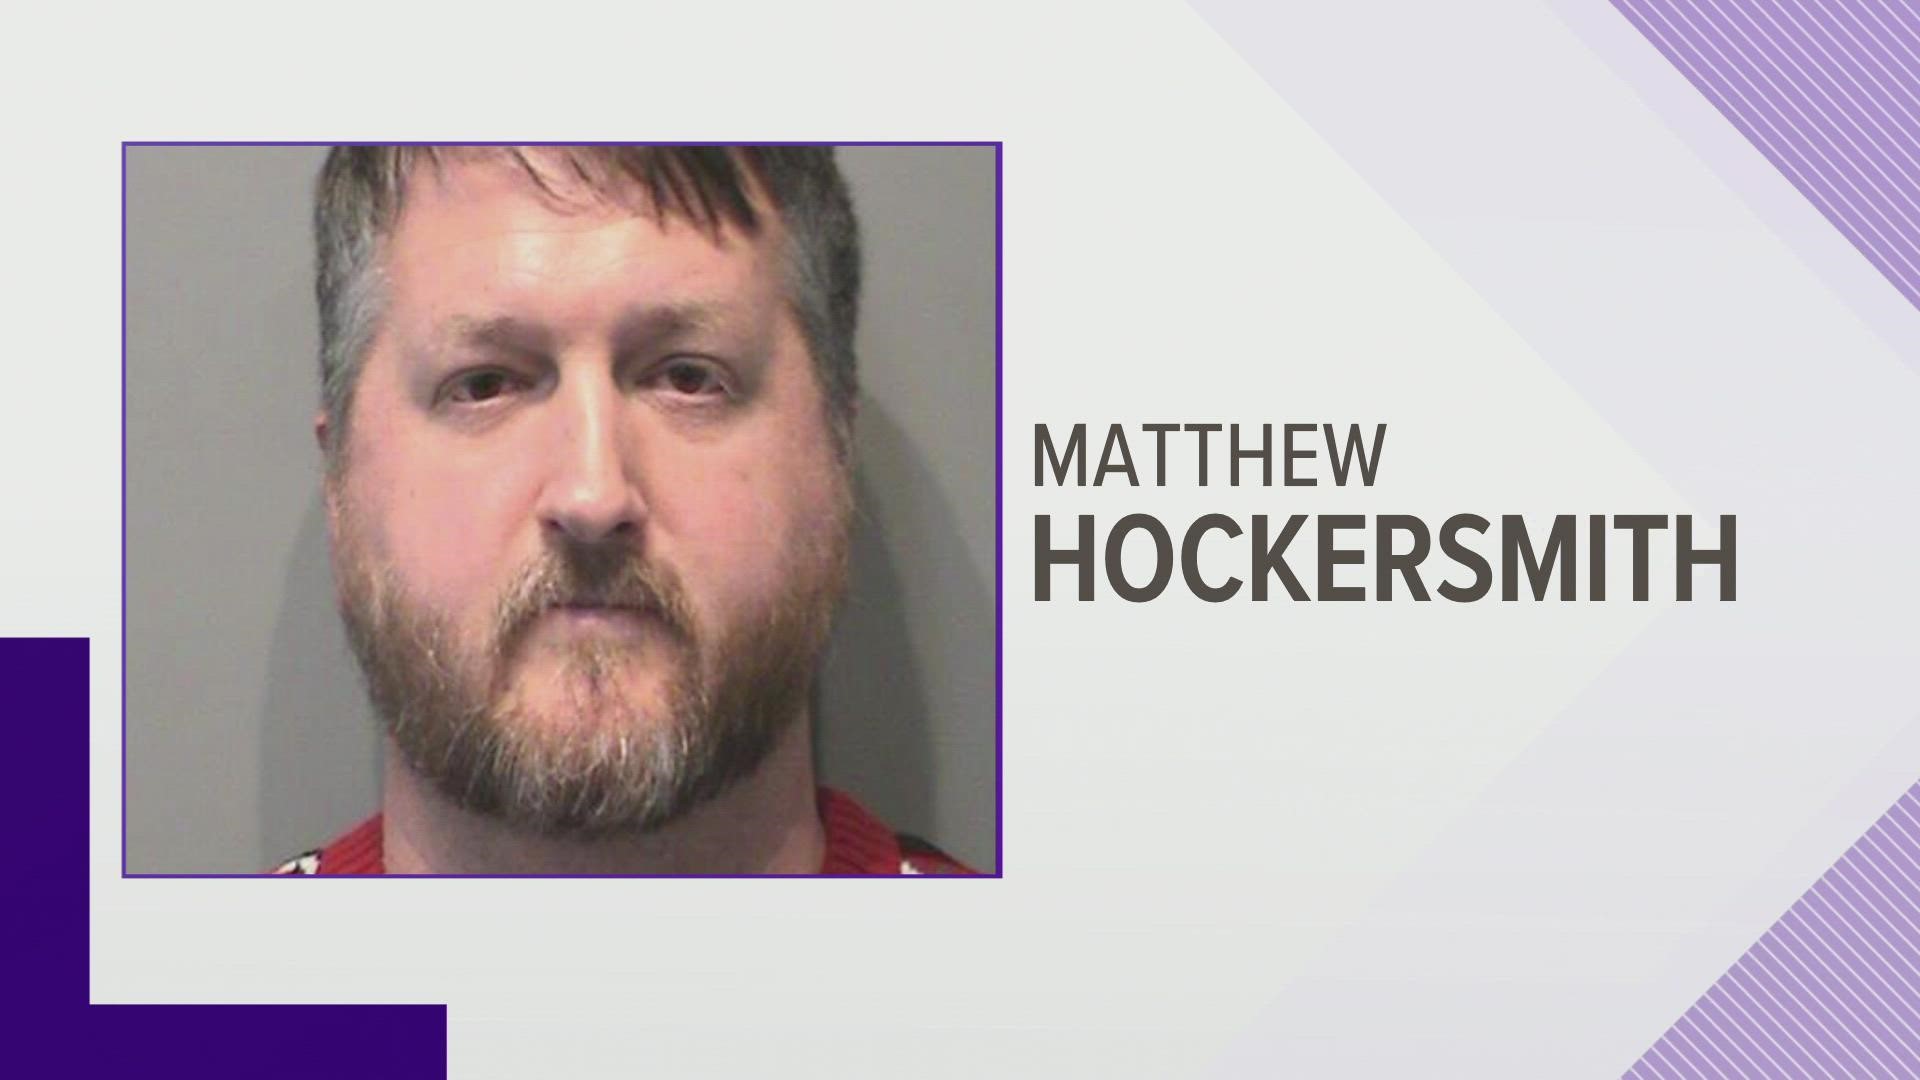 Matthew Hockersmith, 40, admitted to investigators he had a sexual relationship with a female student. It allegedly began in October.